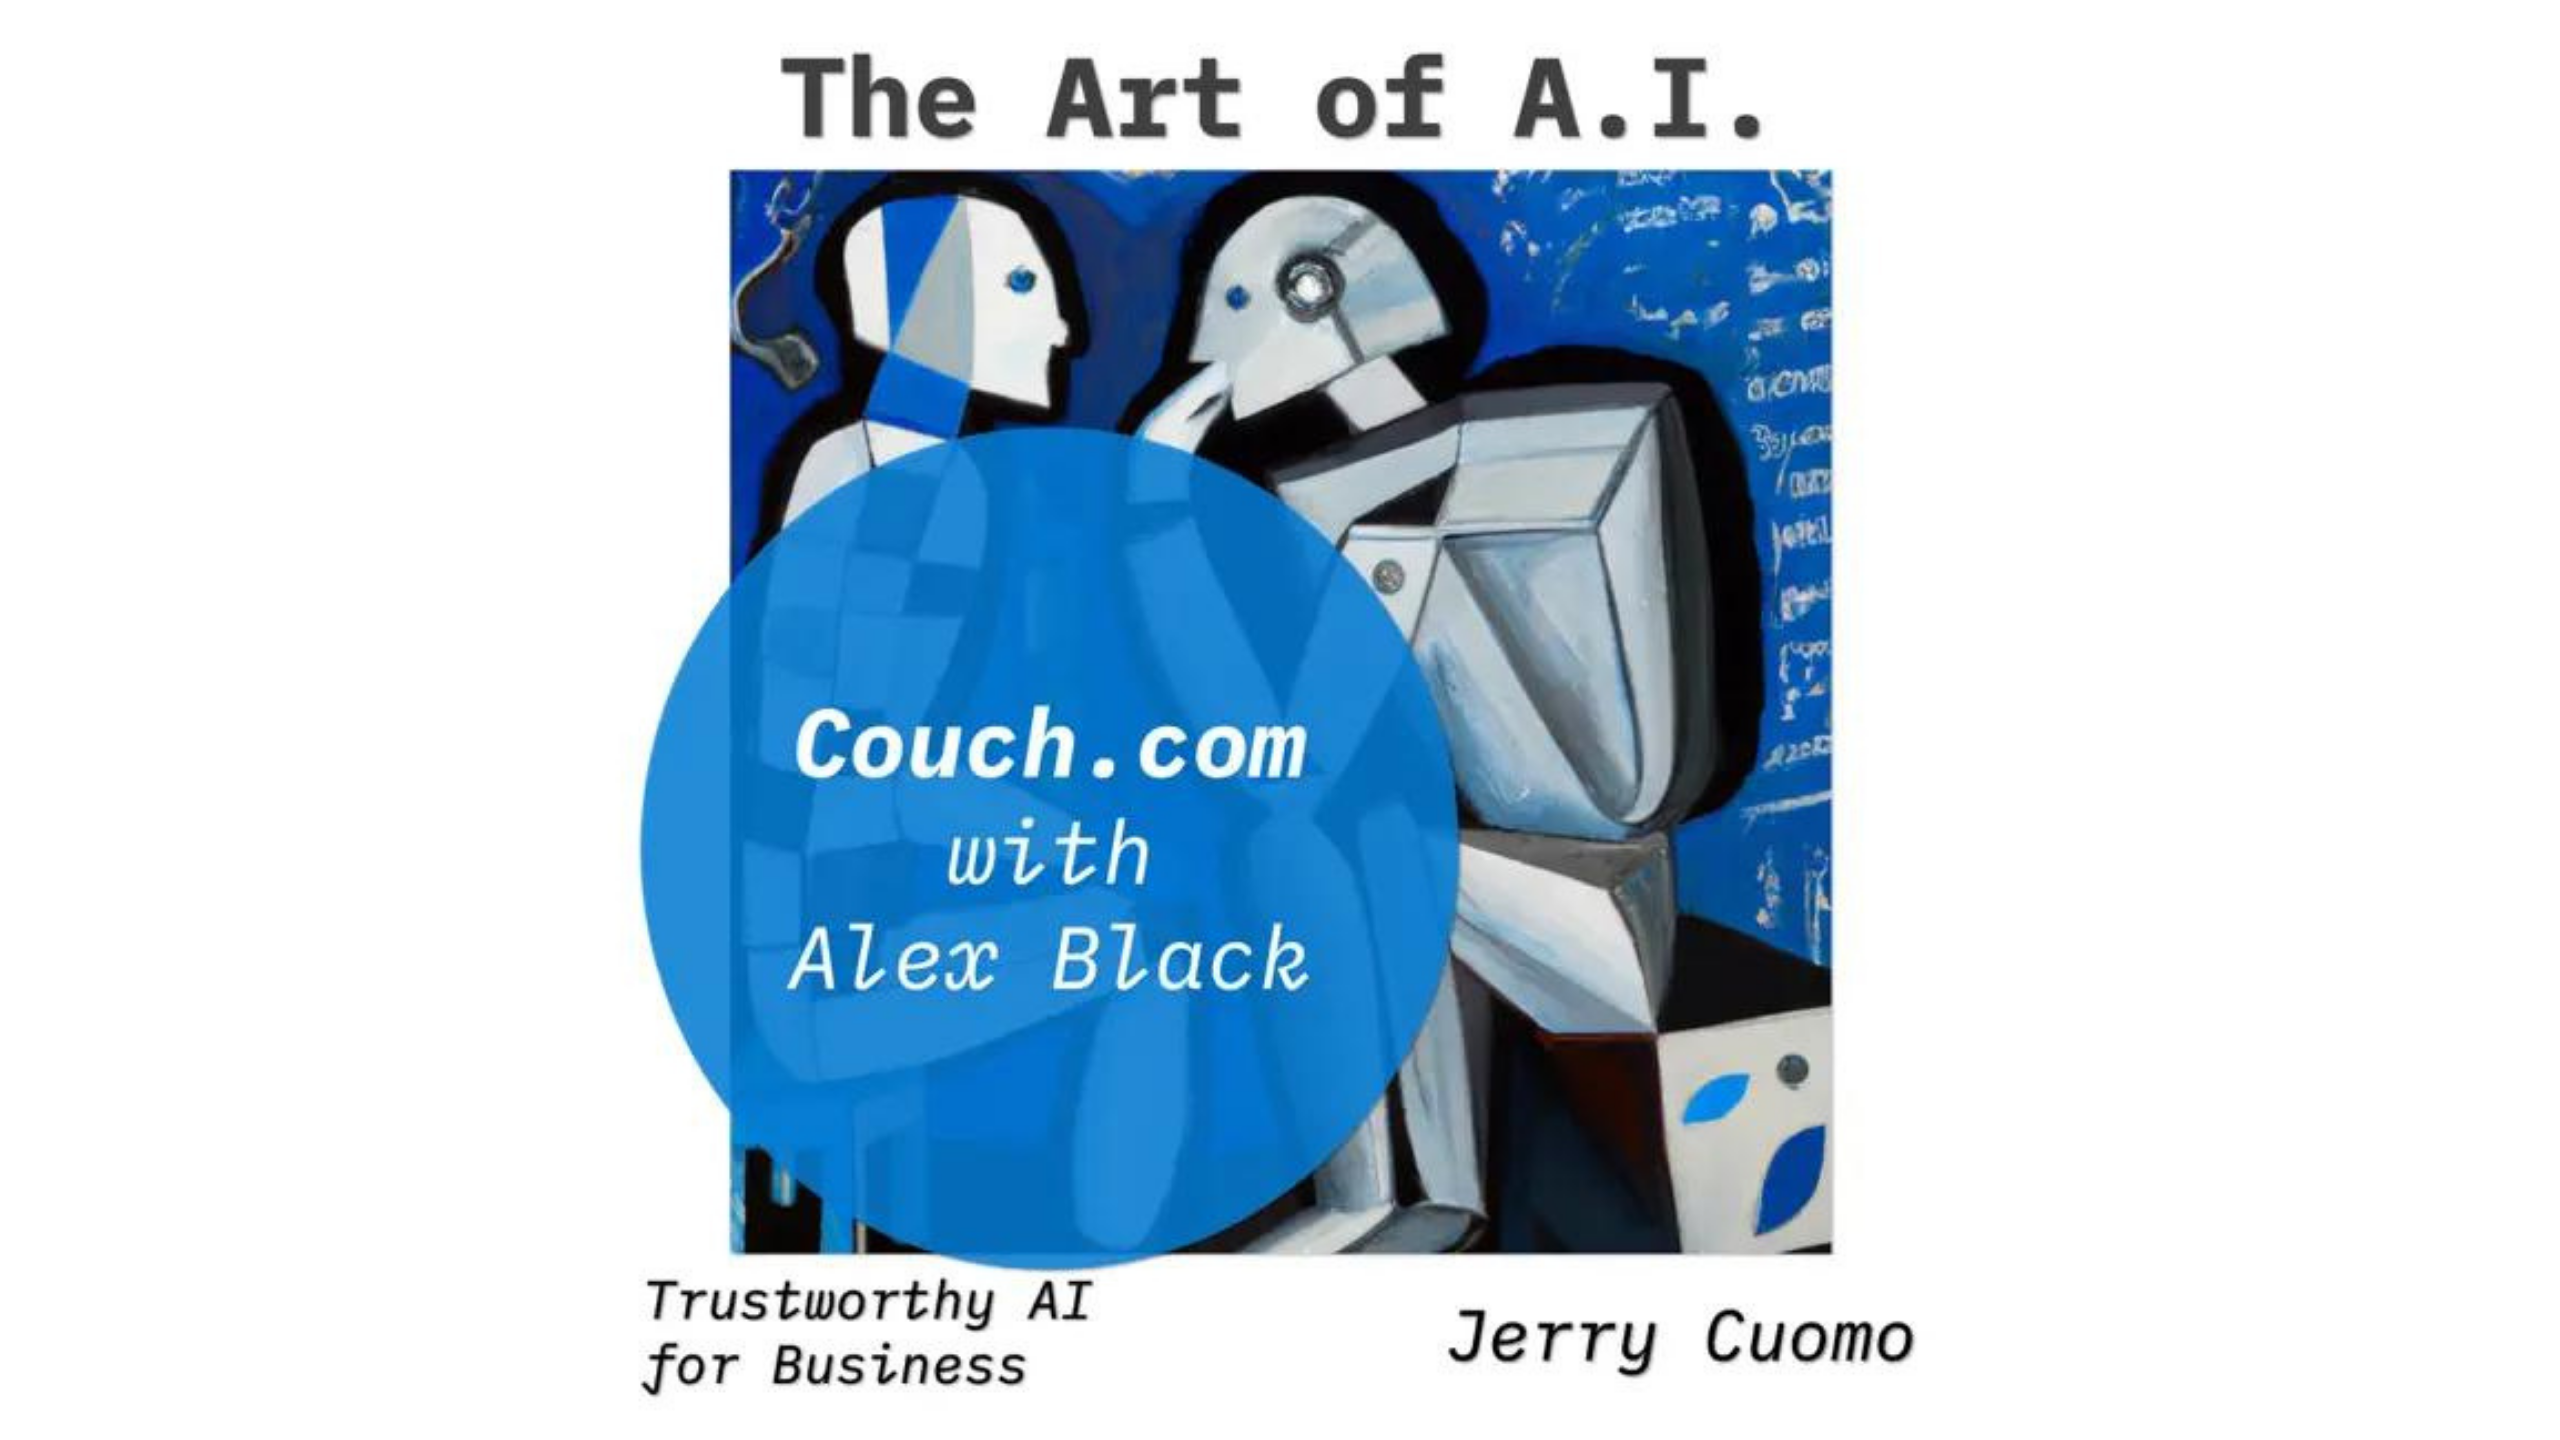 A digital artwork featuring two robots with geometric bodies in discussion. The title reads, "The Art of A.I." with a blue circle in the middle containing the text "Couch.com with Alex Black." The bottom also reads, "Trustworthy AI for Business" and "Jerry Cuomo.